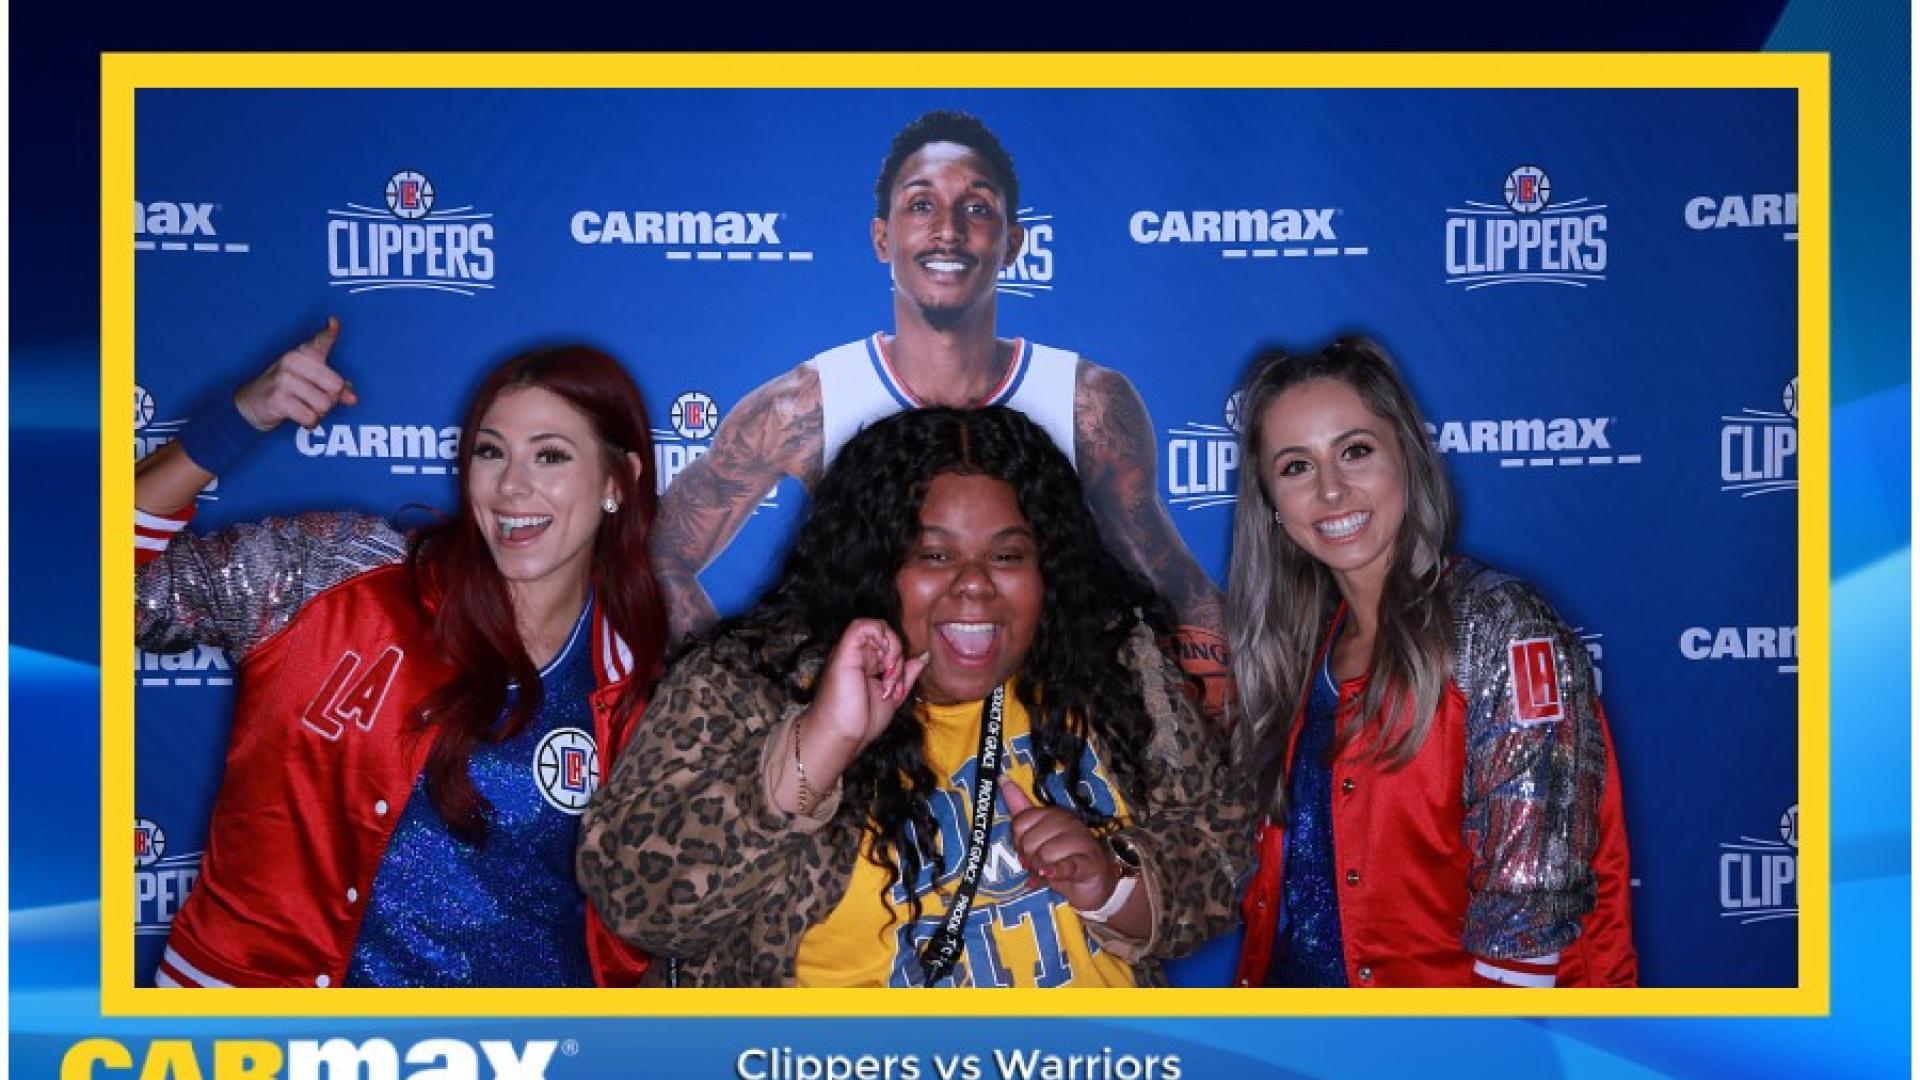 Jazsaii at a Clippers vs. Warriors game